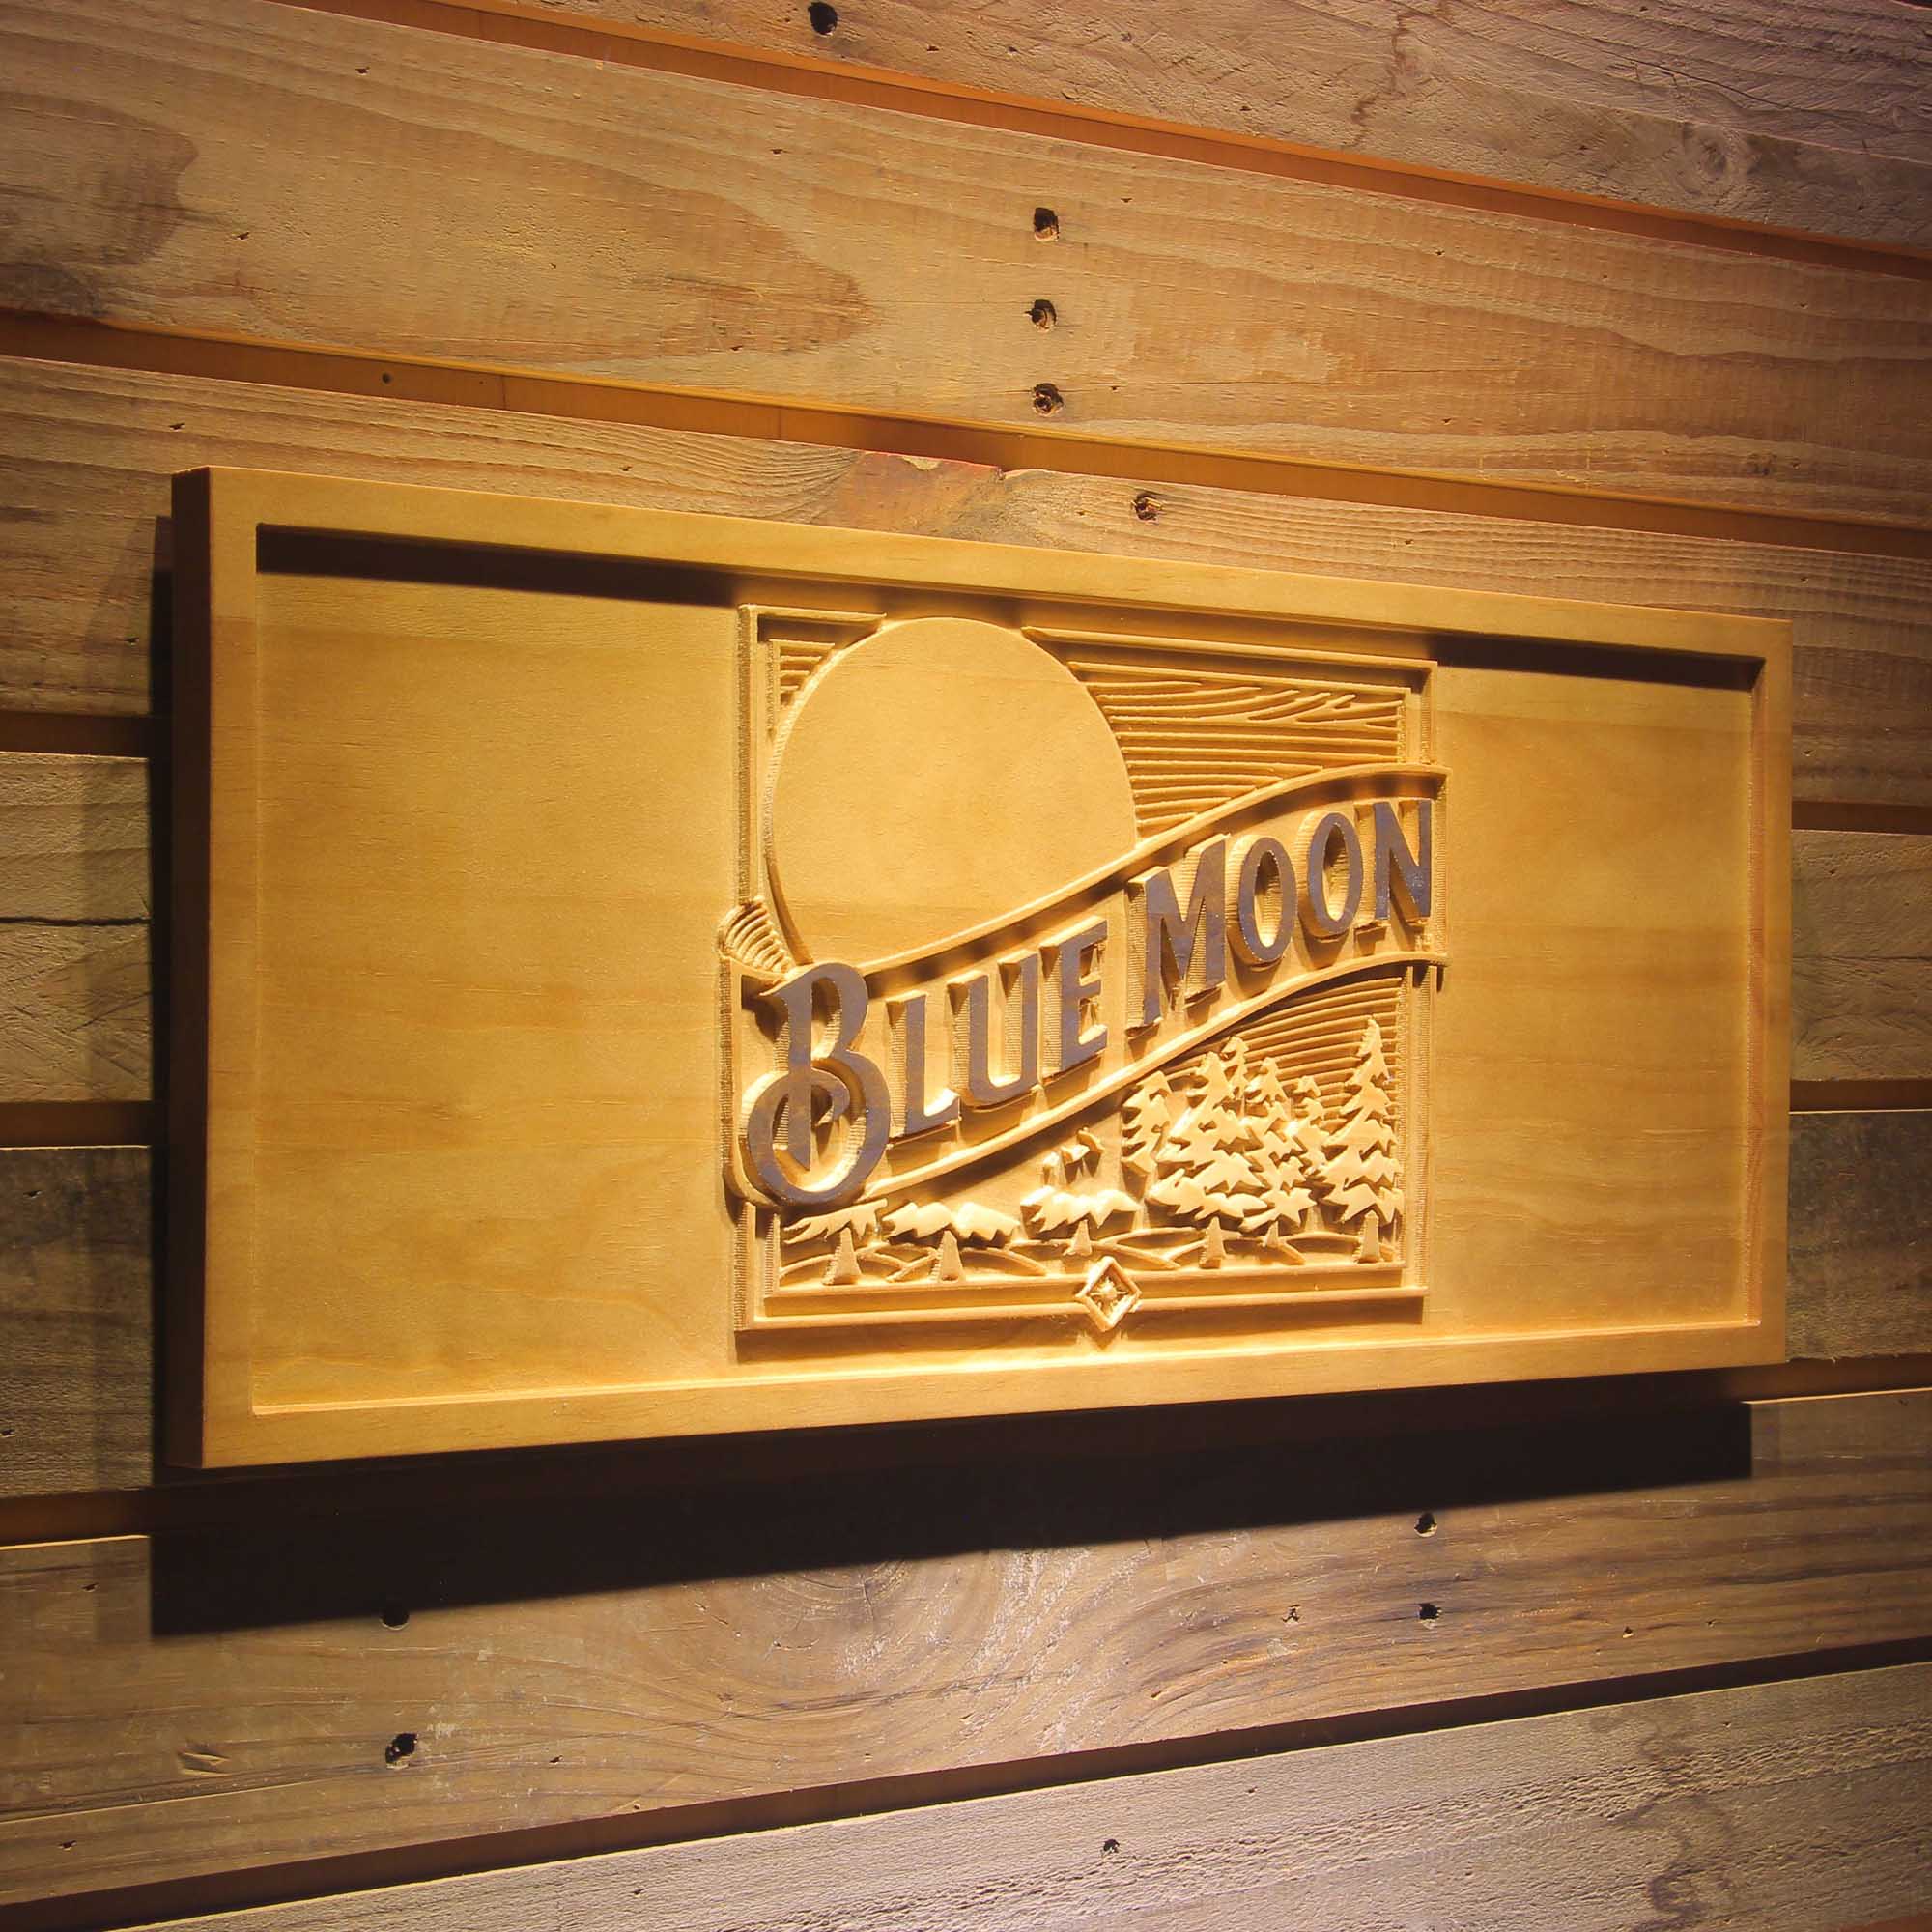 Blue Moon 3D Solid Wooden Craving Sign